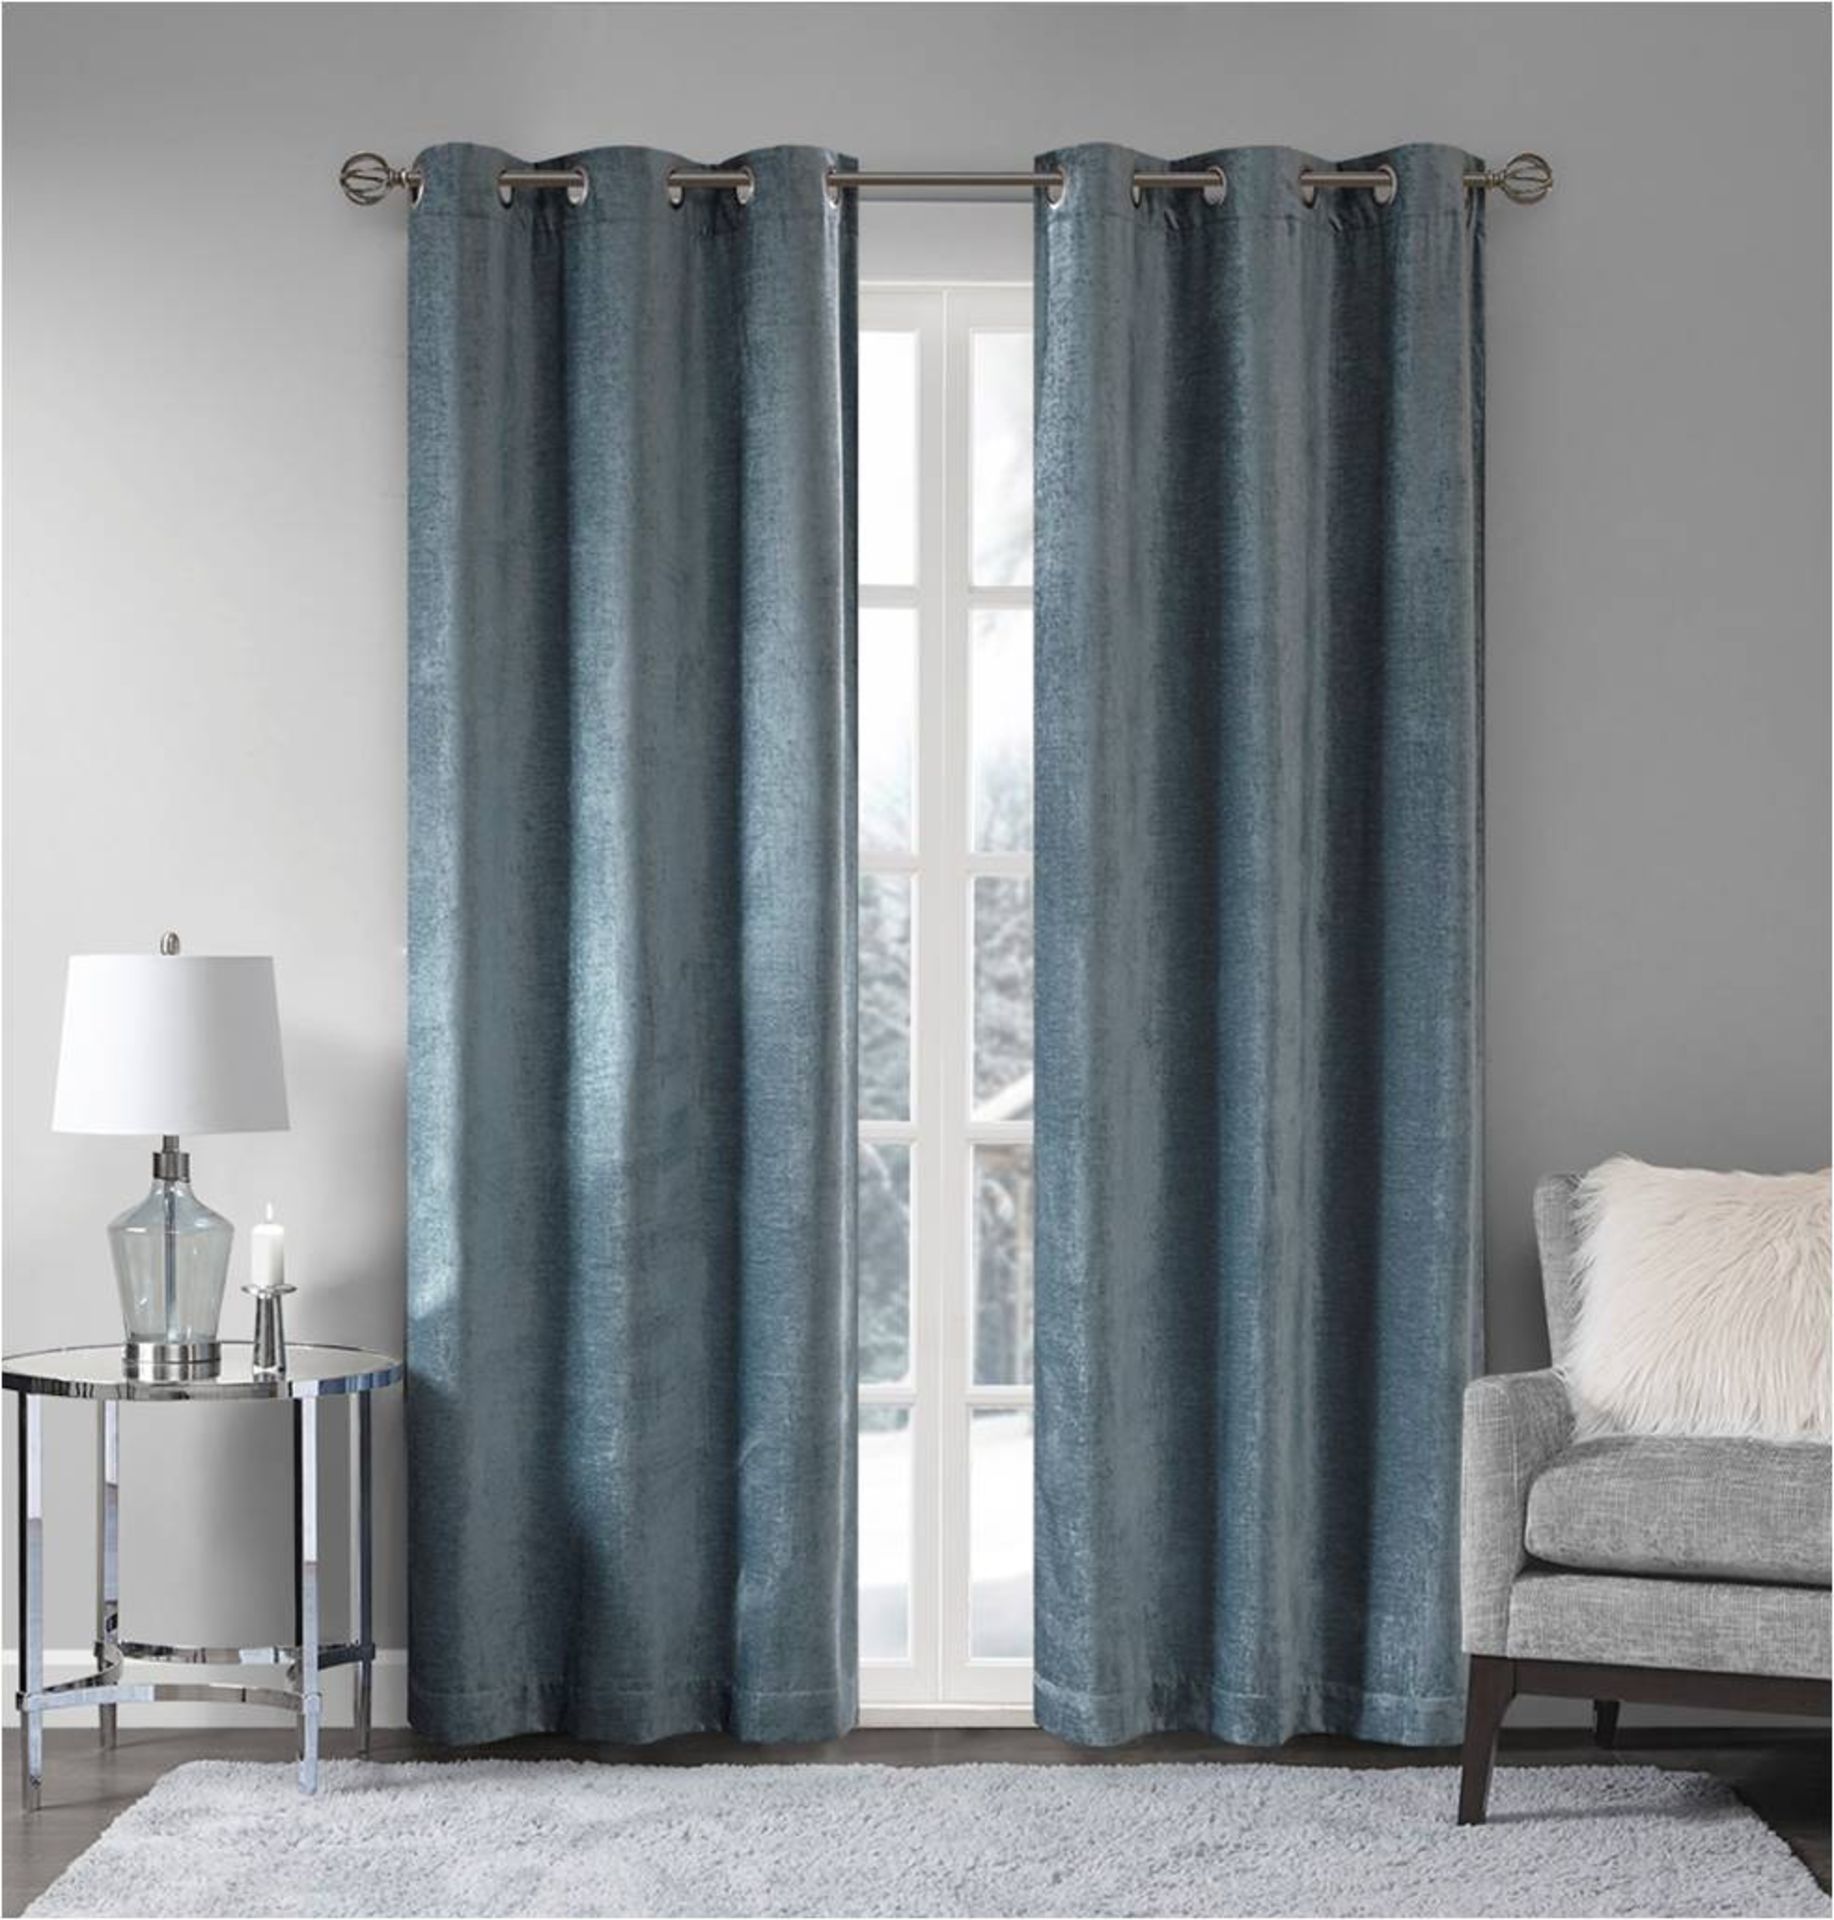 1 x Set of Madison Park Palazzo Chenille Blue Curtains 90x90" - Product Code MP40-0295UK (Brand